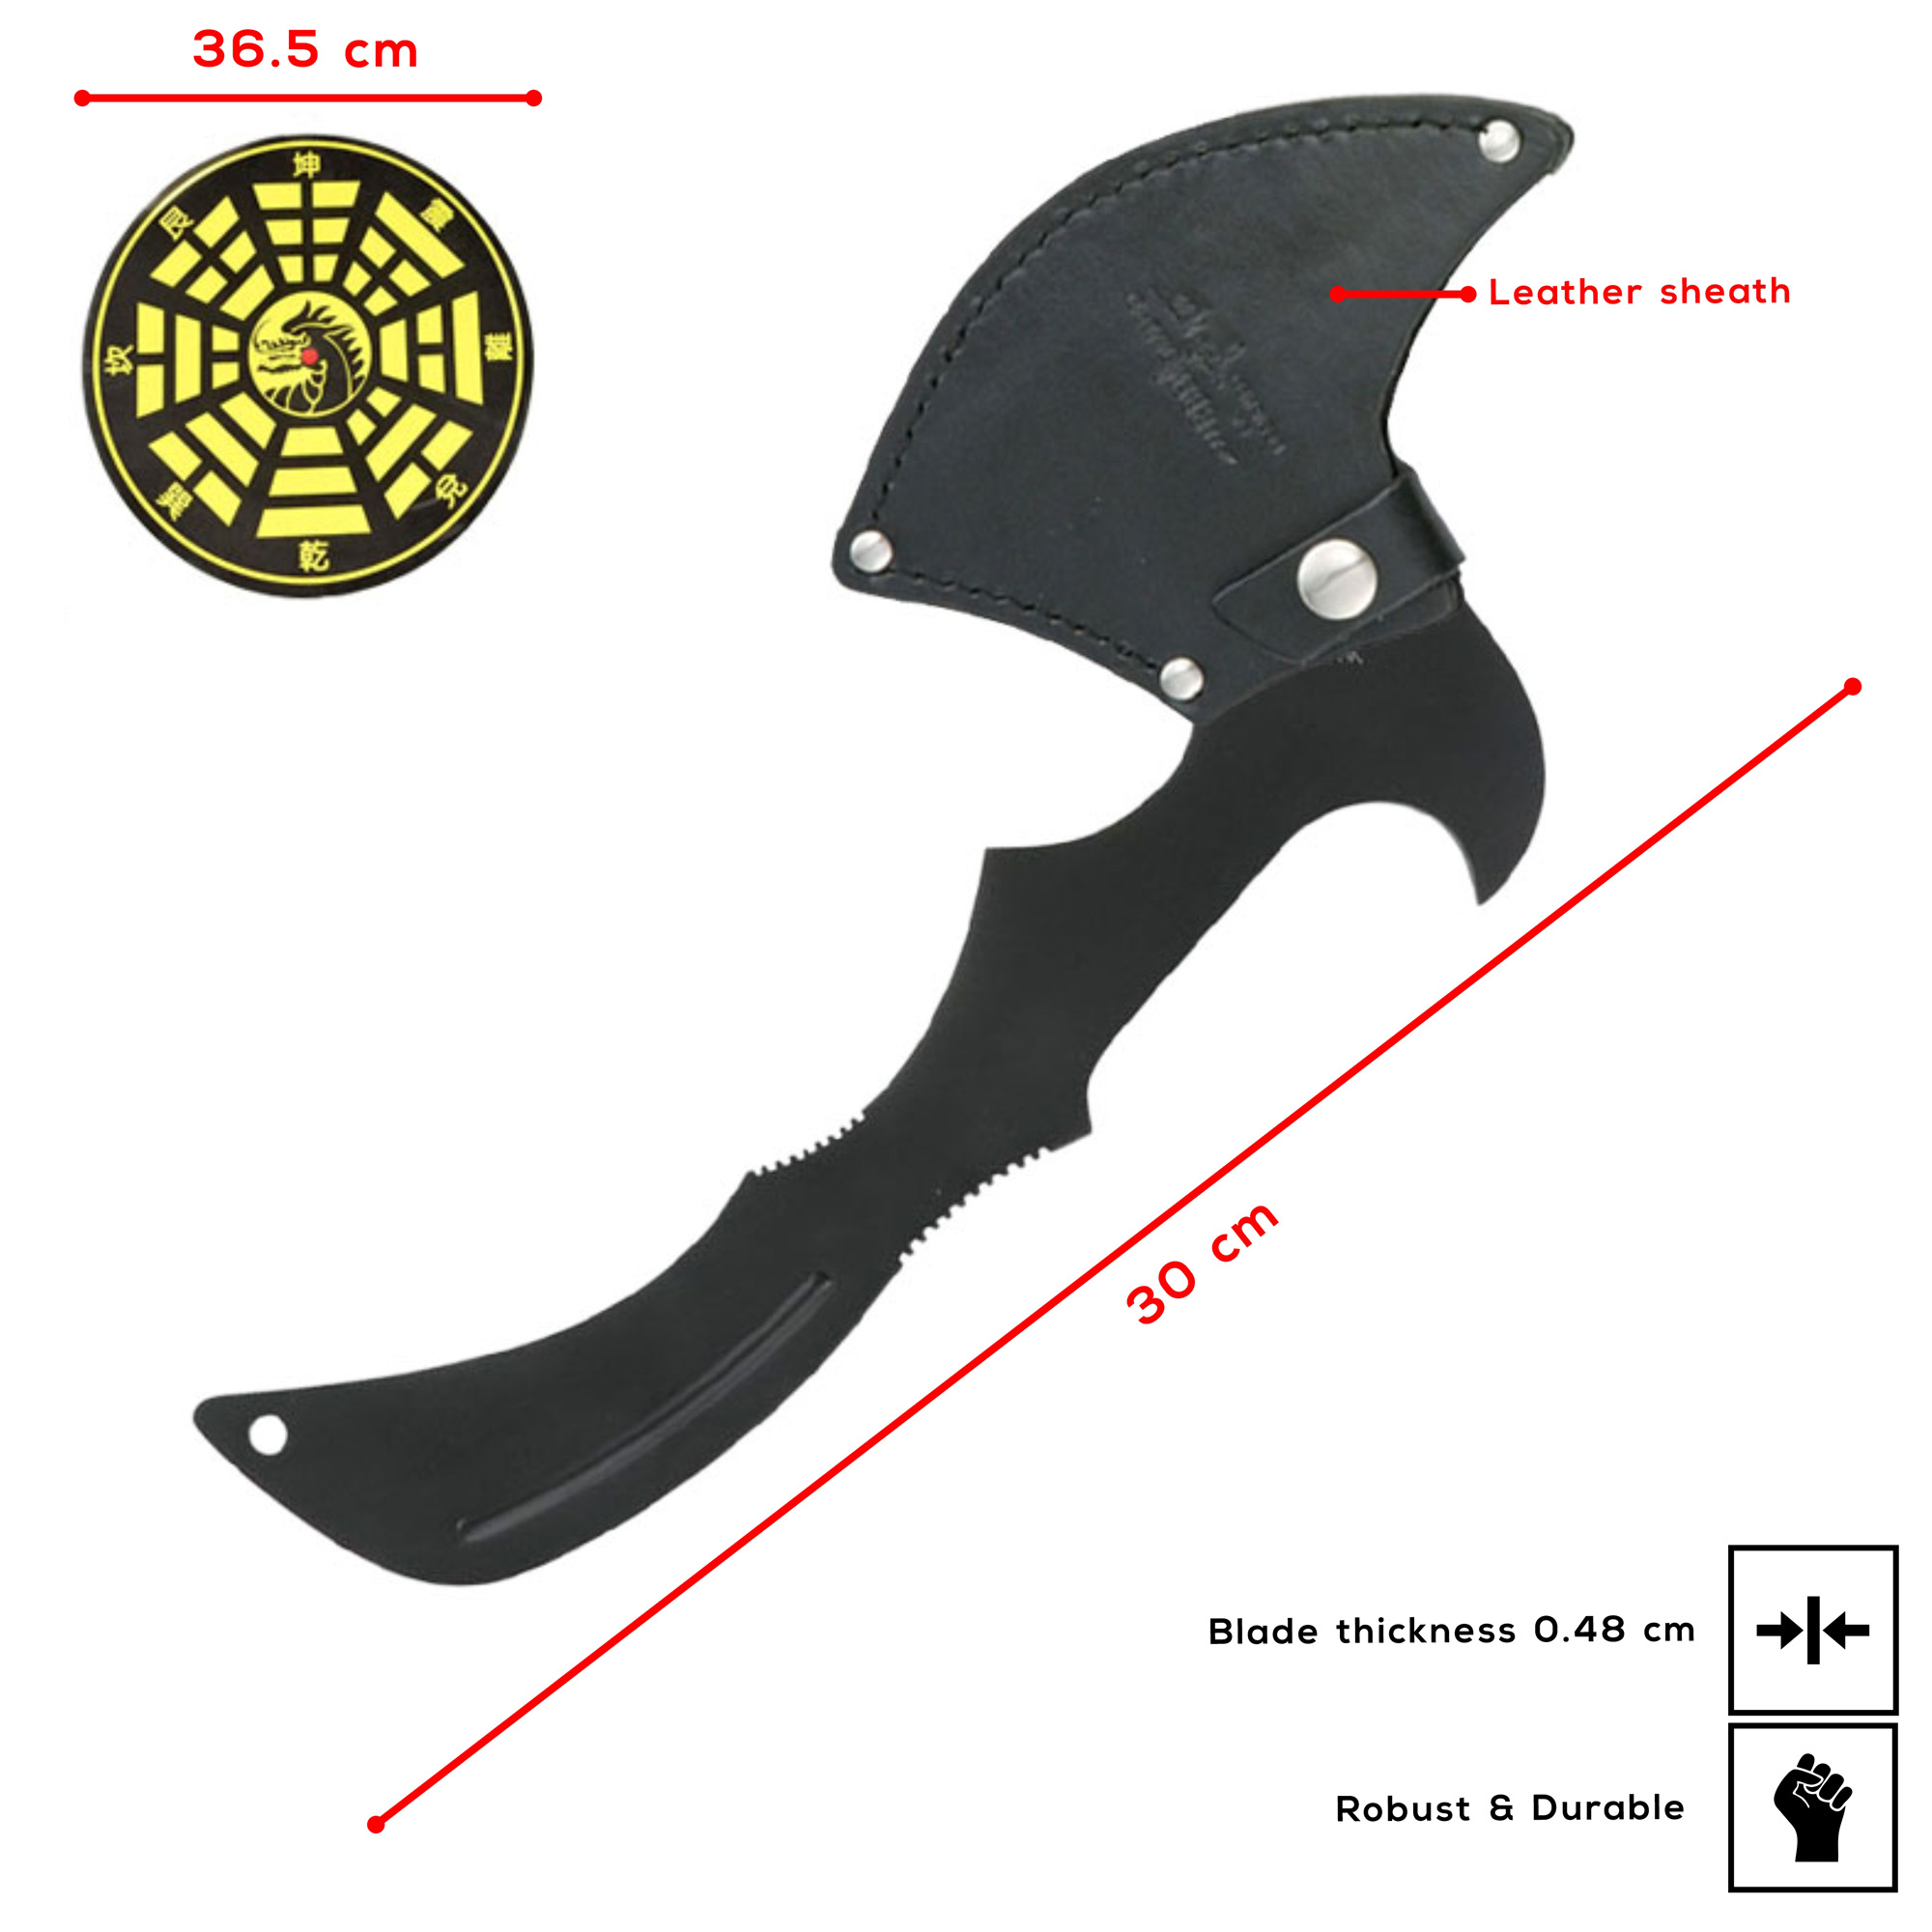 Gil Hibben Pro Throwing Axe with Target